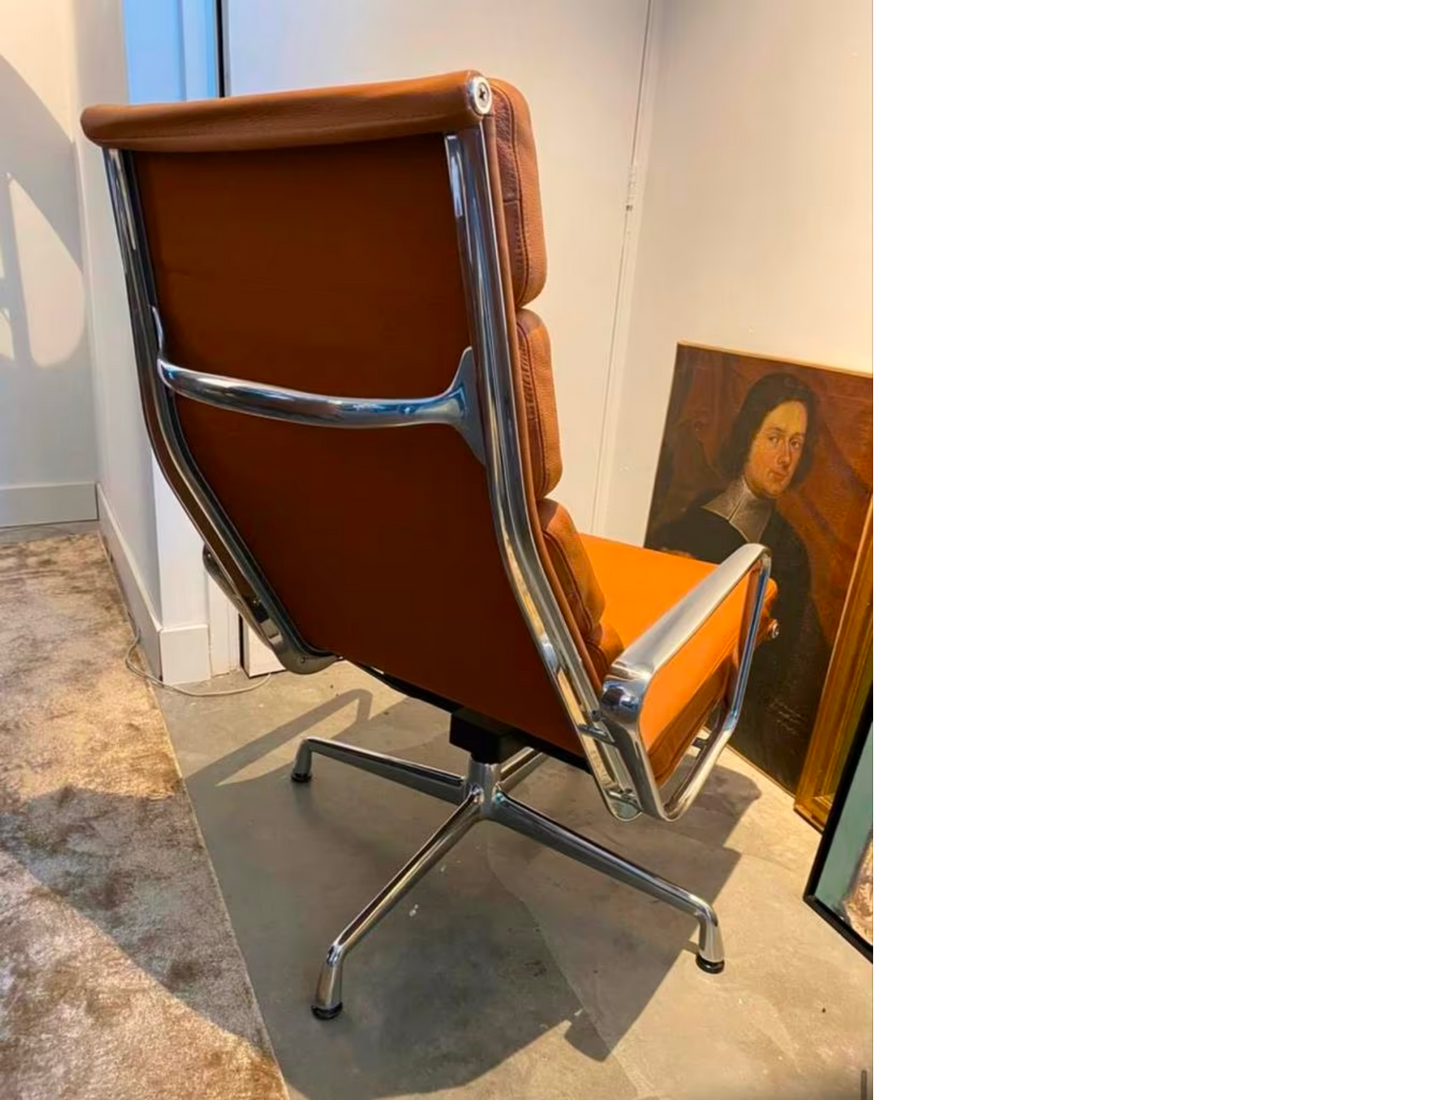 New Vitra EA 222 lounge chair in leather, aluminum, tilting and swiveling